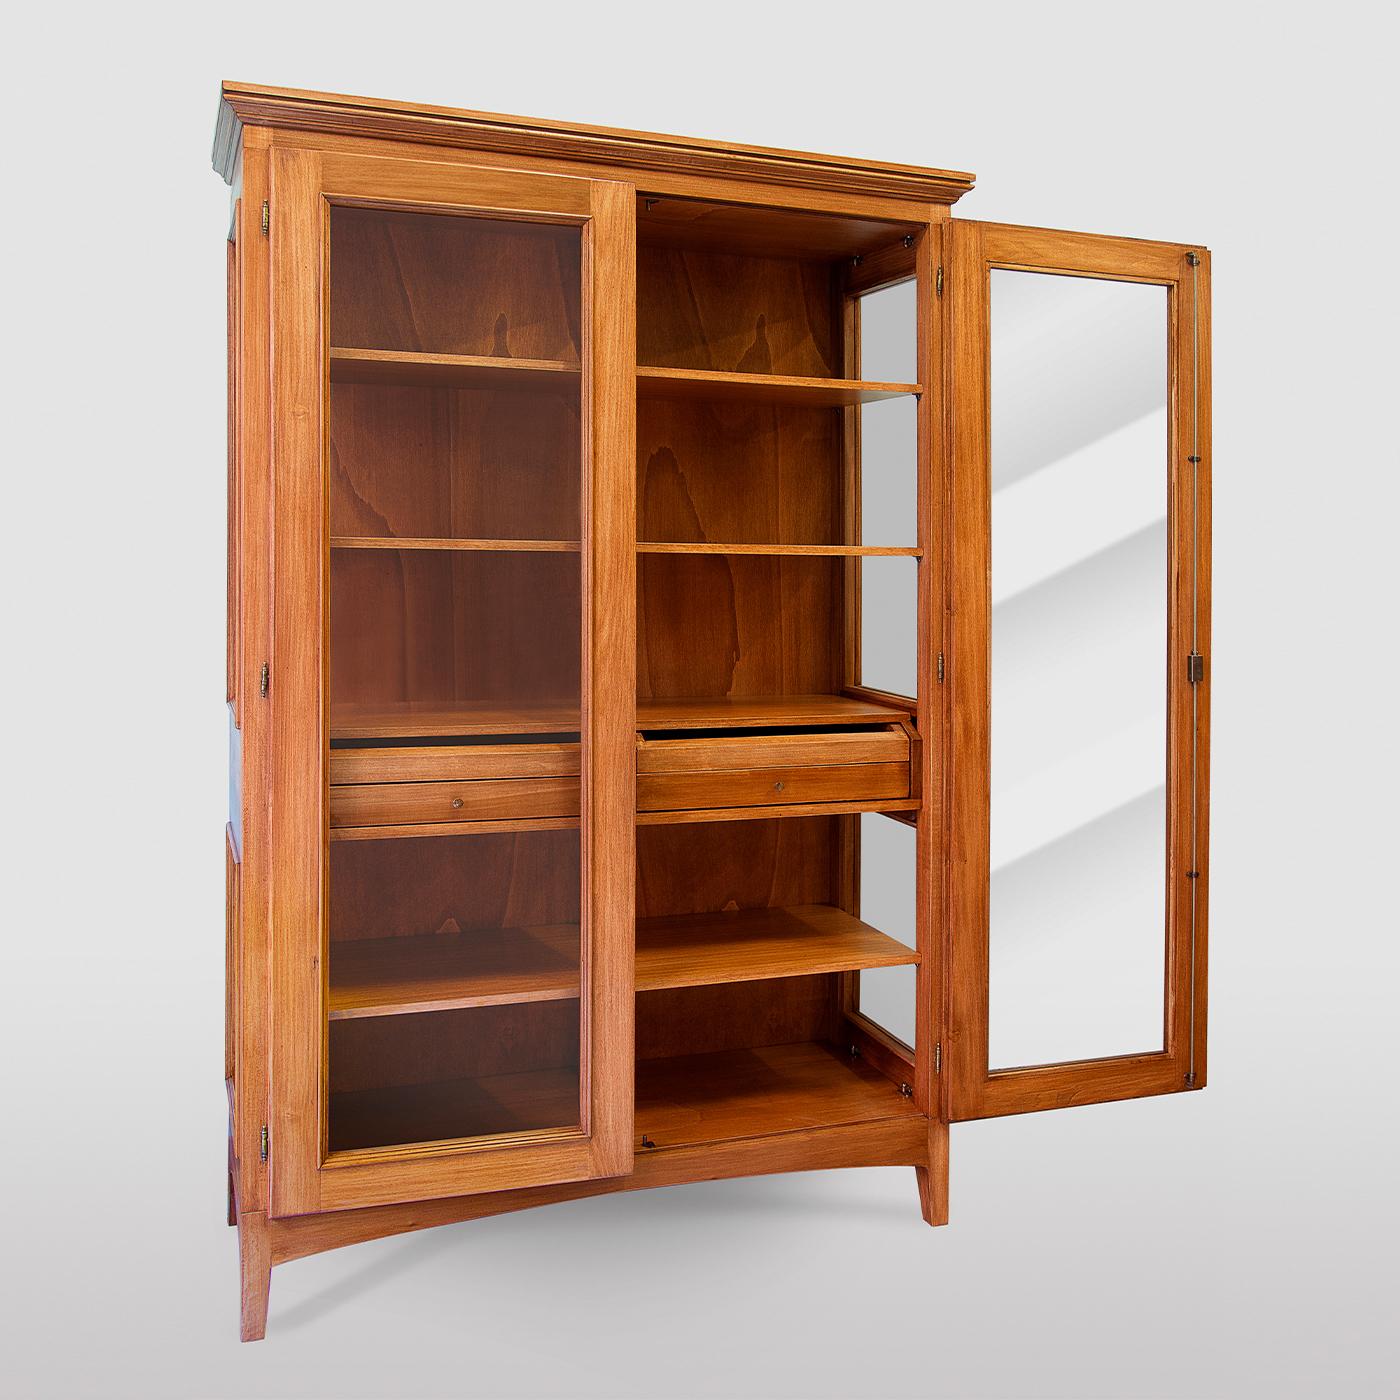 This display cabinet in walnut-stained, solid tulipwood is a true gem that will surely make a superb statement in any classic or rustic-chic decor. Raised on tapered feet, the handcrafted structure is adorned with overlapping frames outlining the